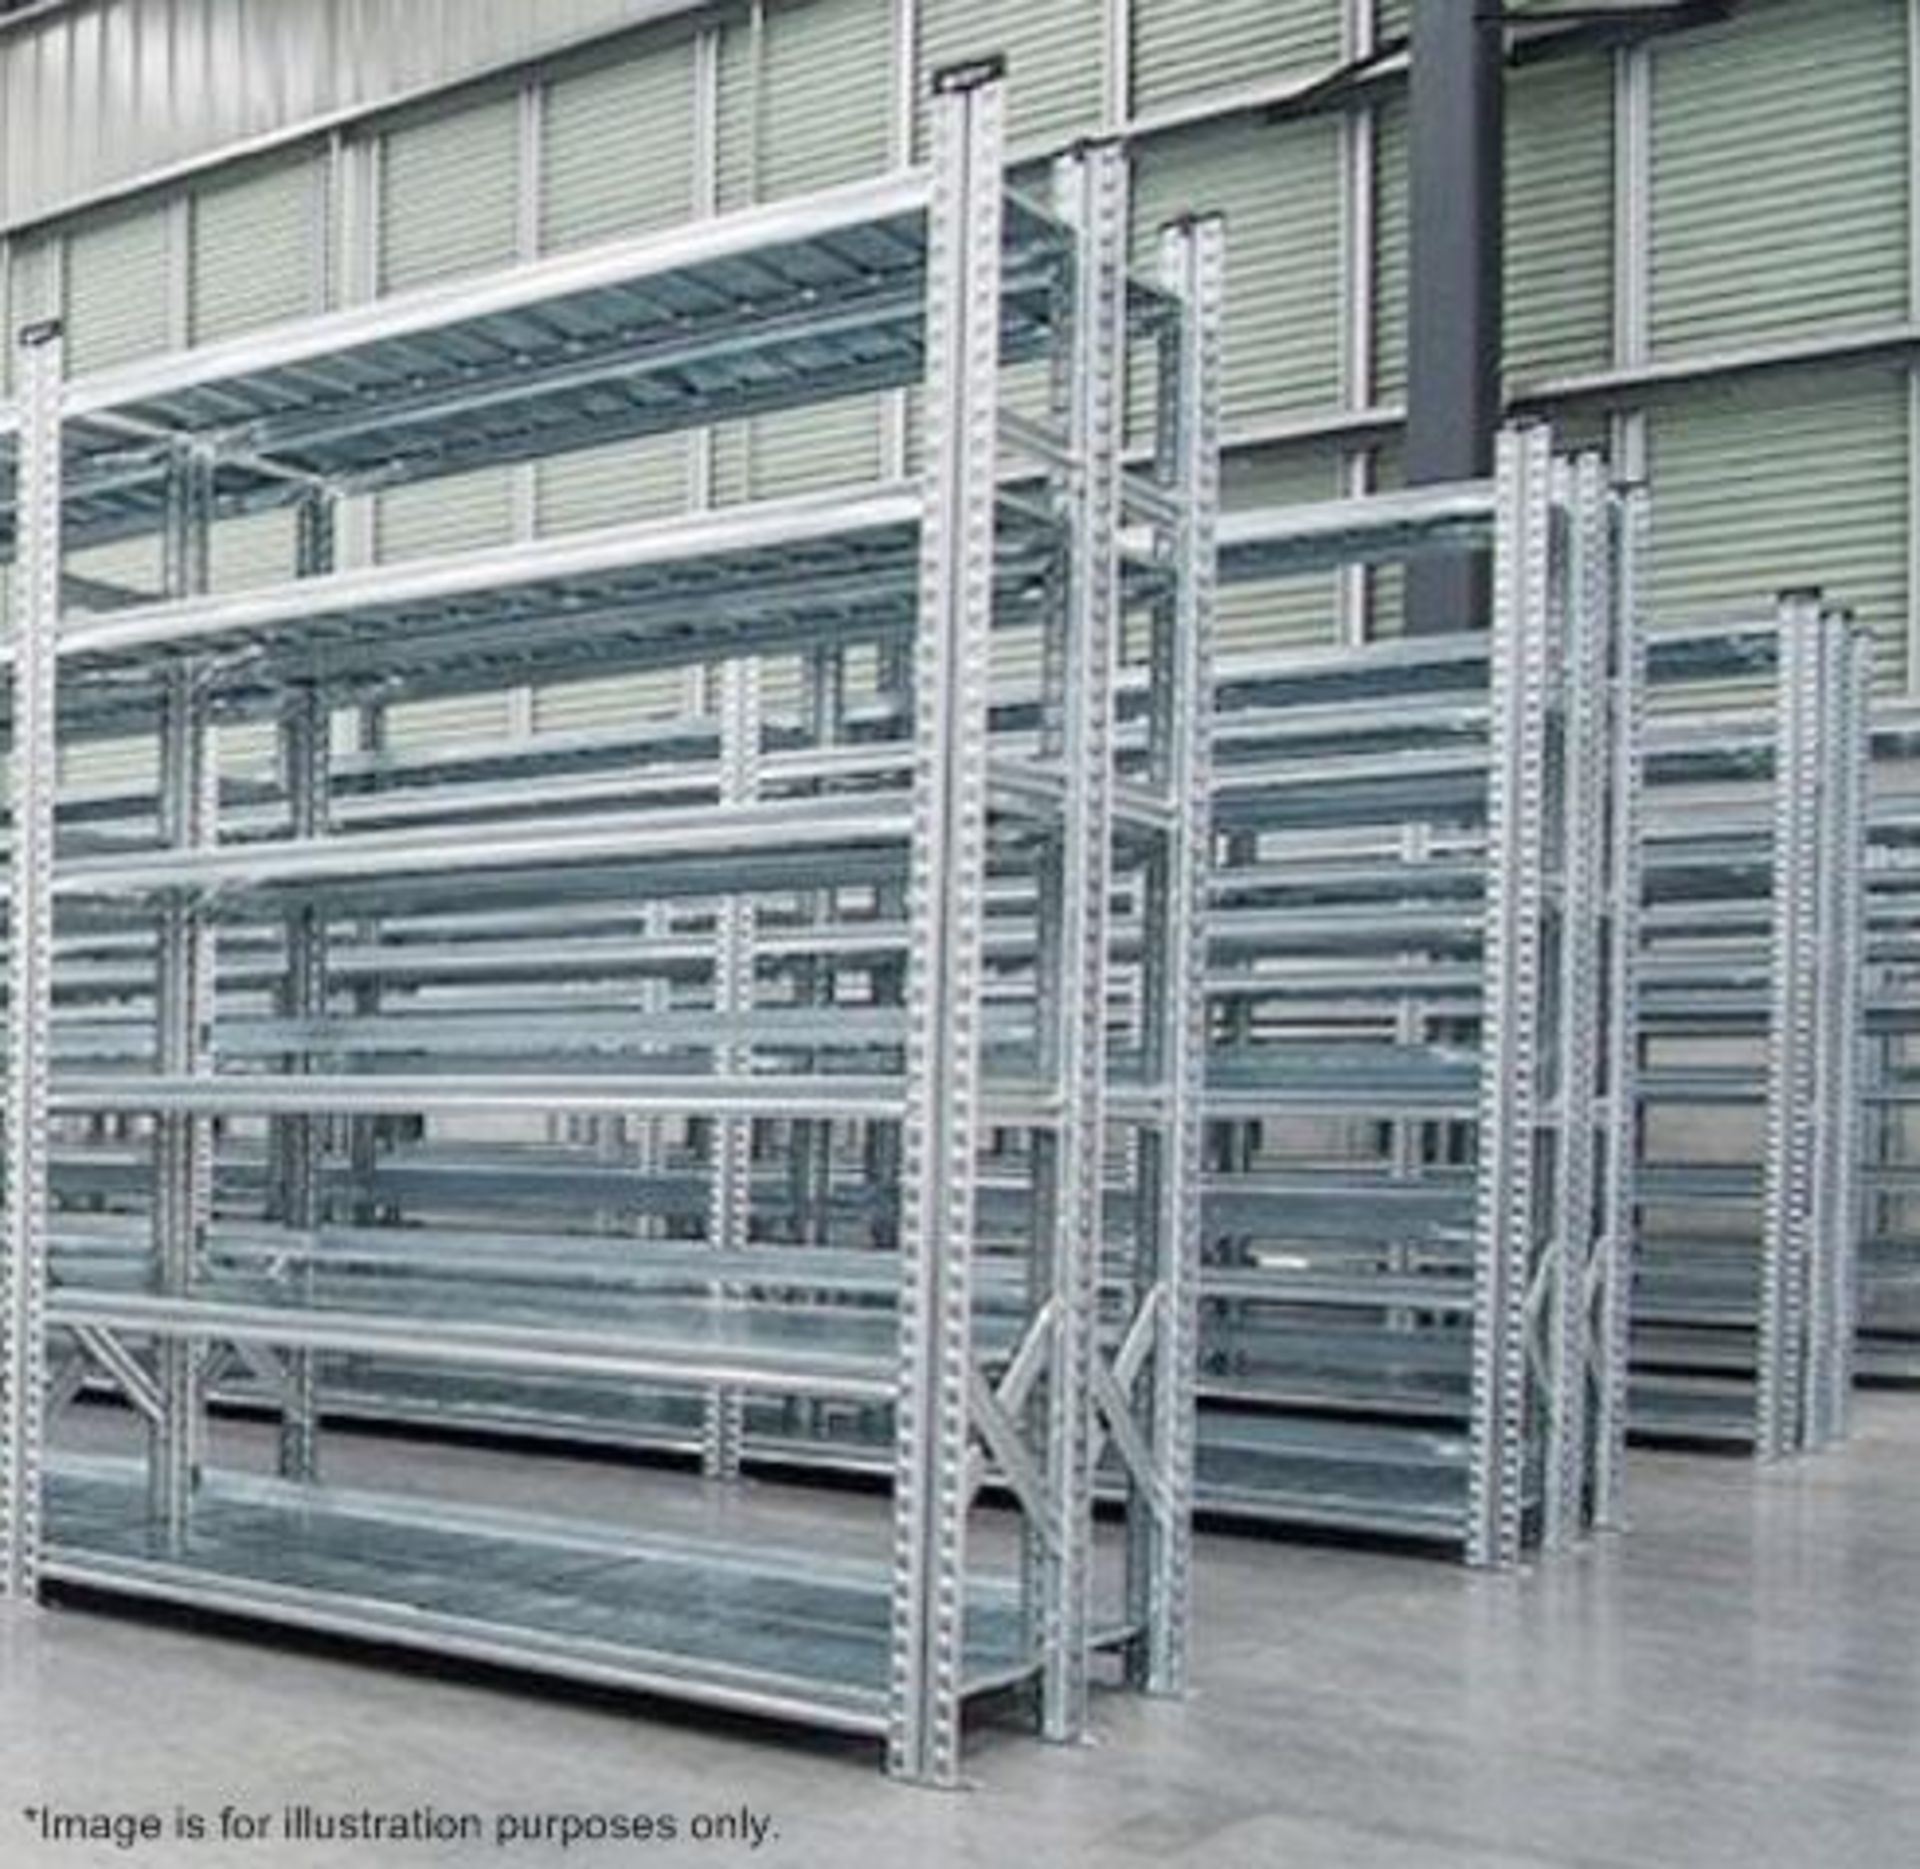 13 x Bays of Metalsistem Steel Modular Storage Shelving - Includes 28 Pieces - Recently Removed - Image 5 of 18